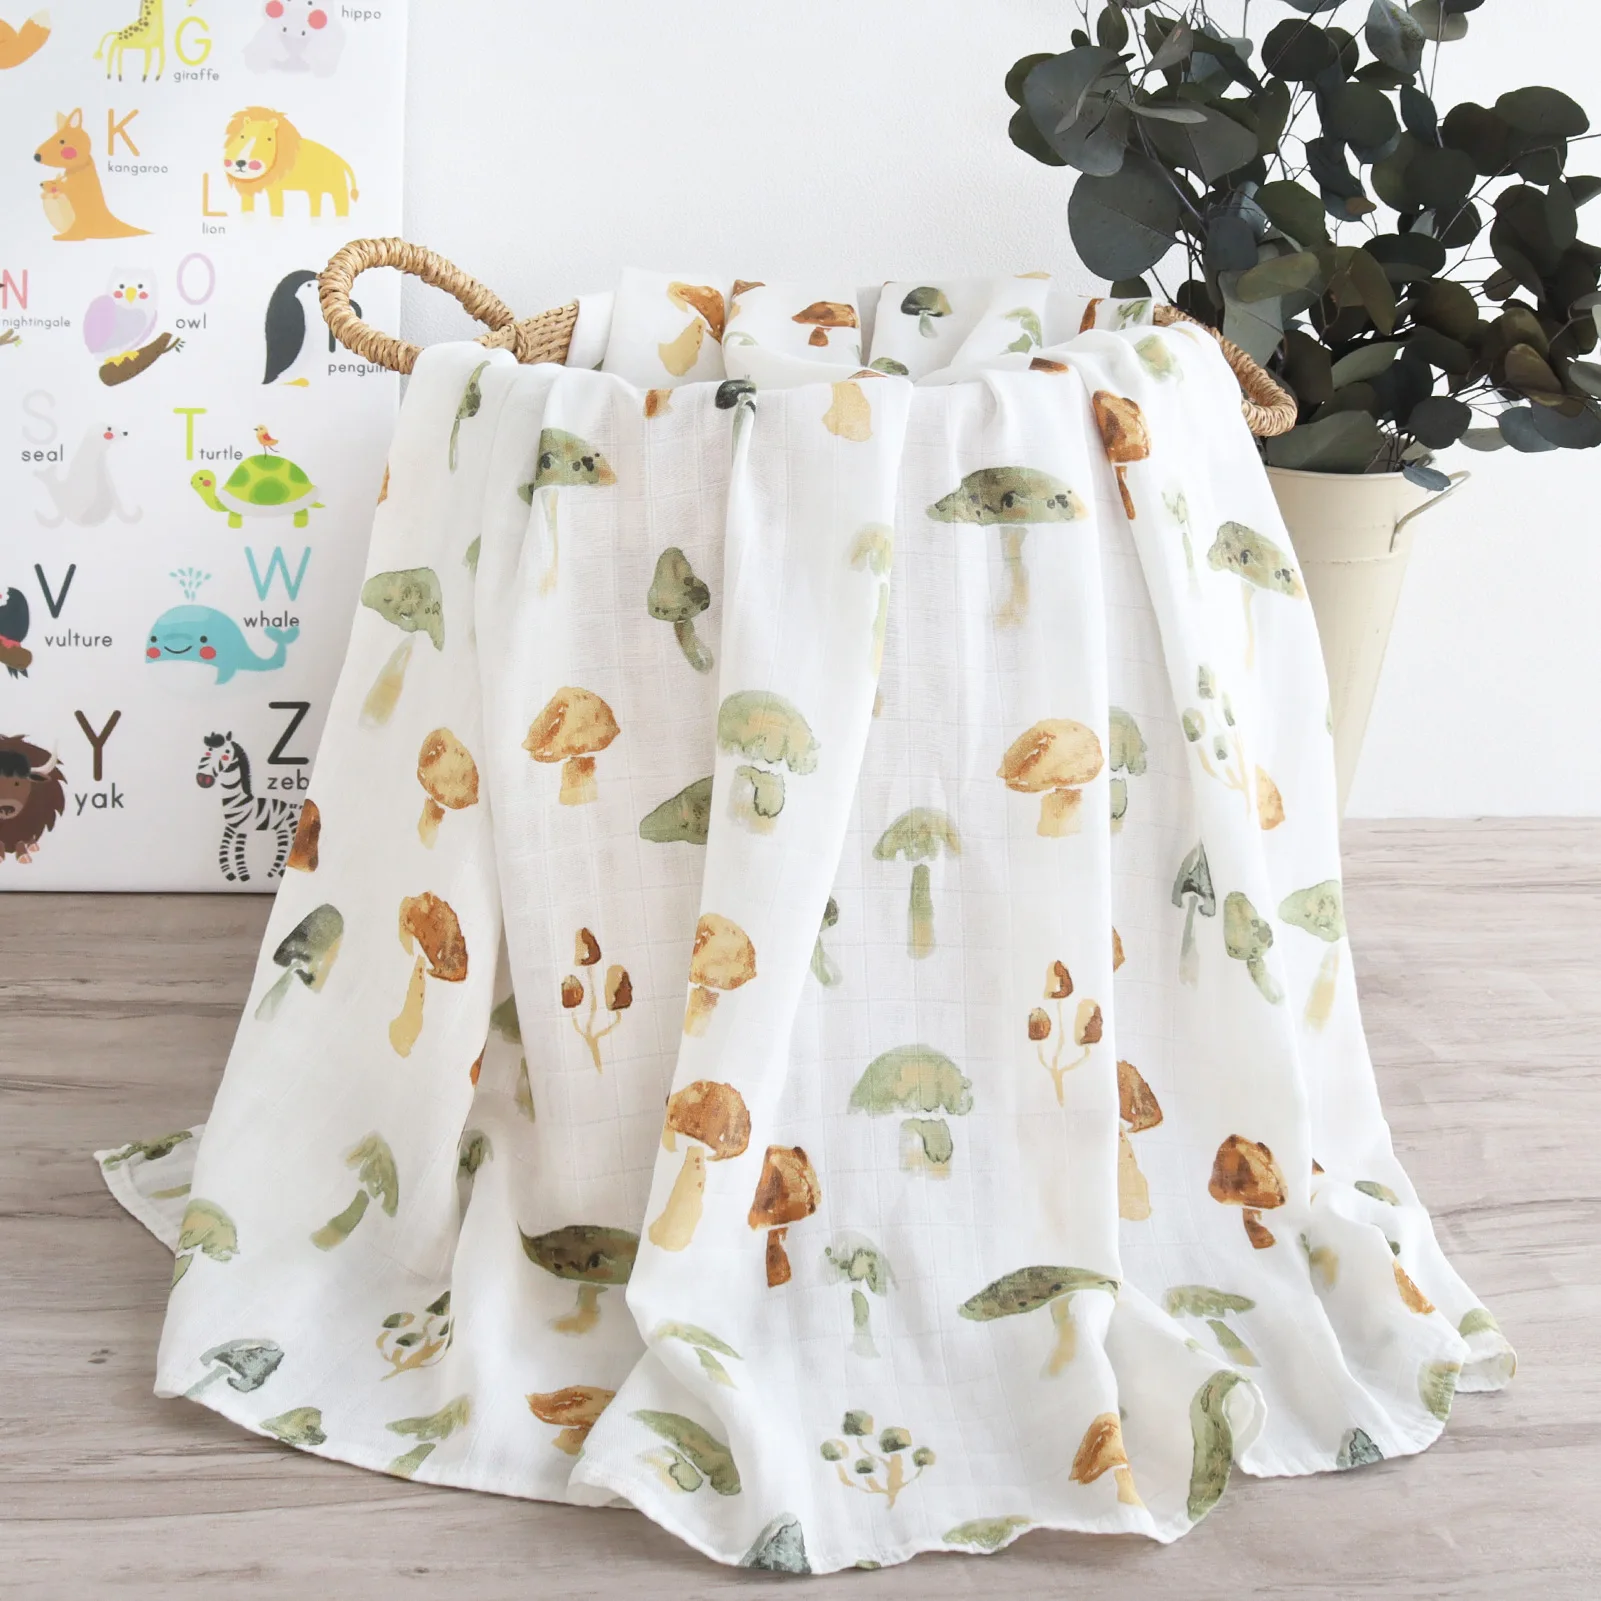 LifeTree Muslin Swaddle Blankets: 2-Pack Neutral Soft Baby Swaddling Wraps